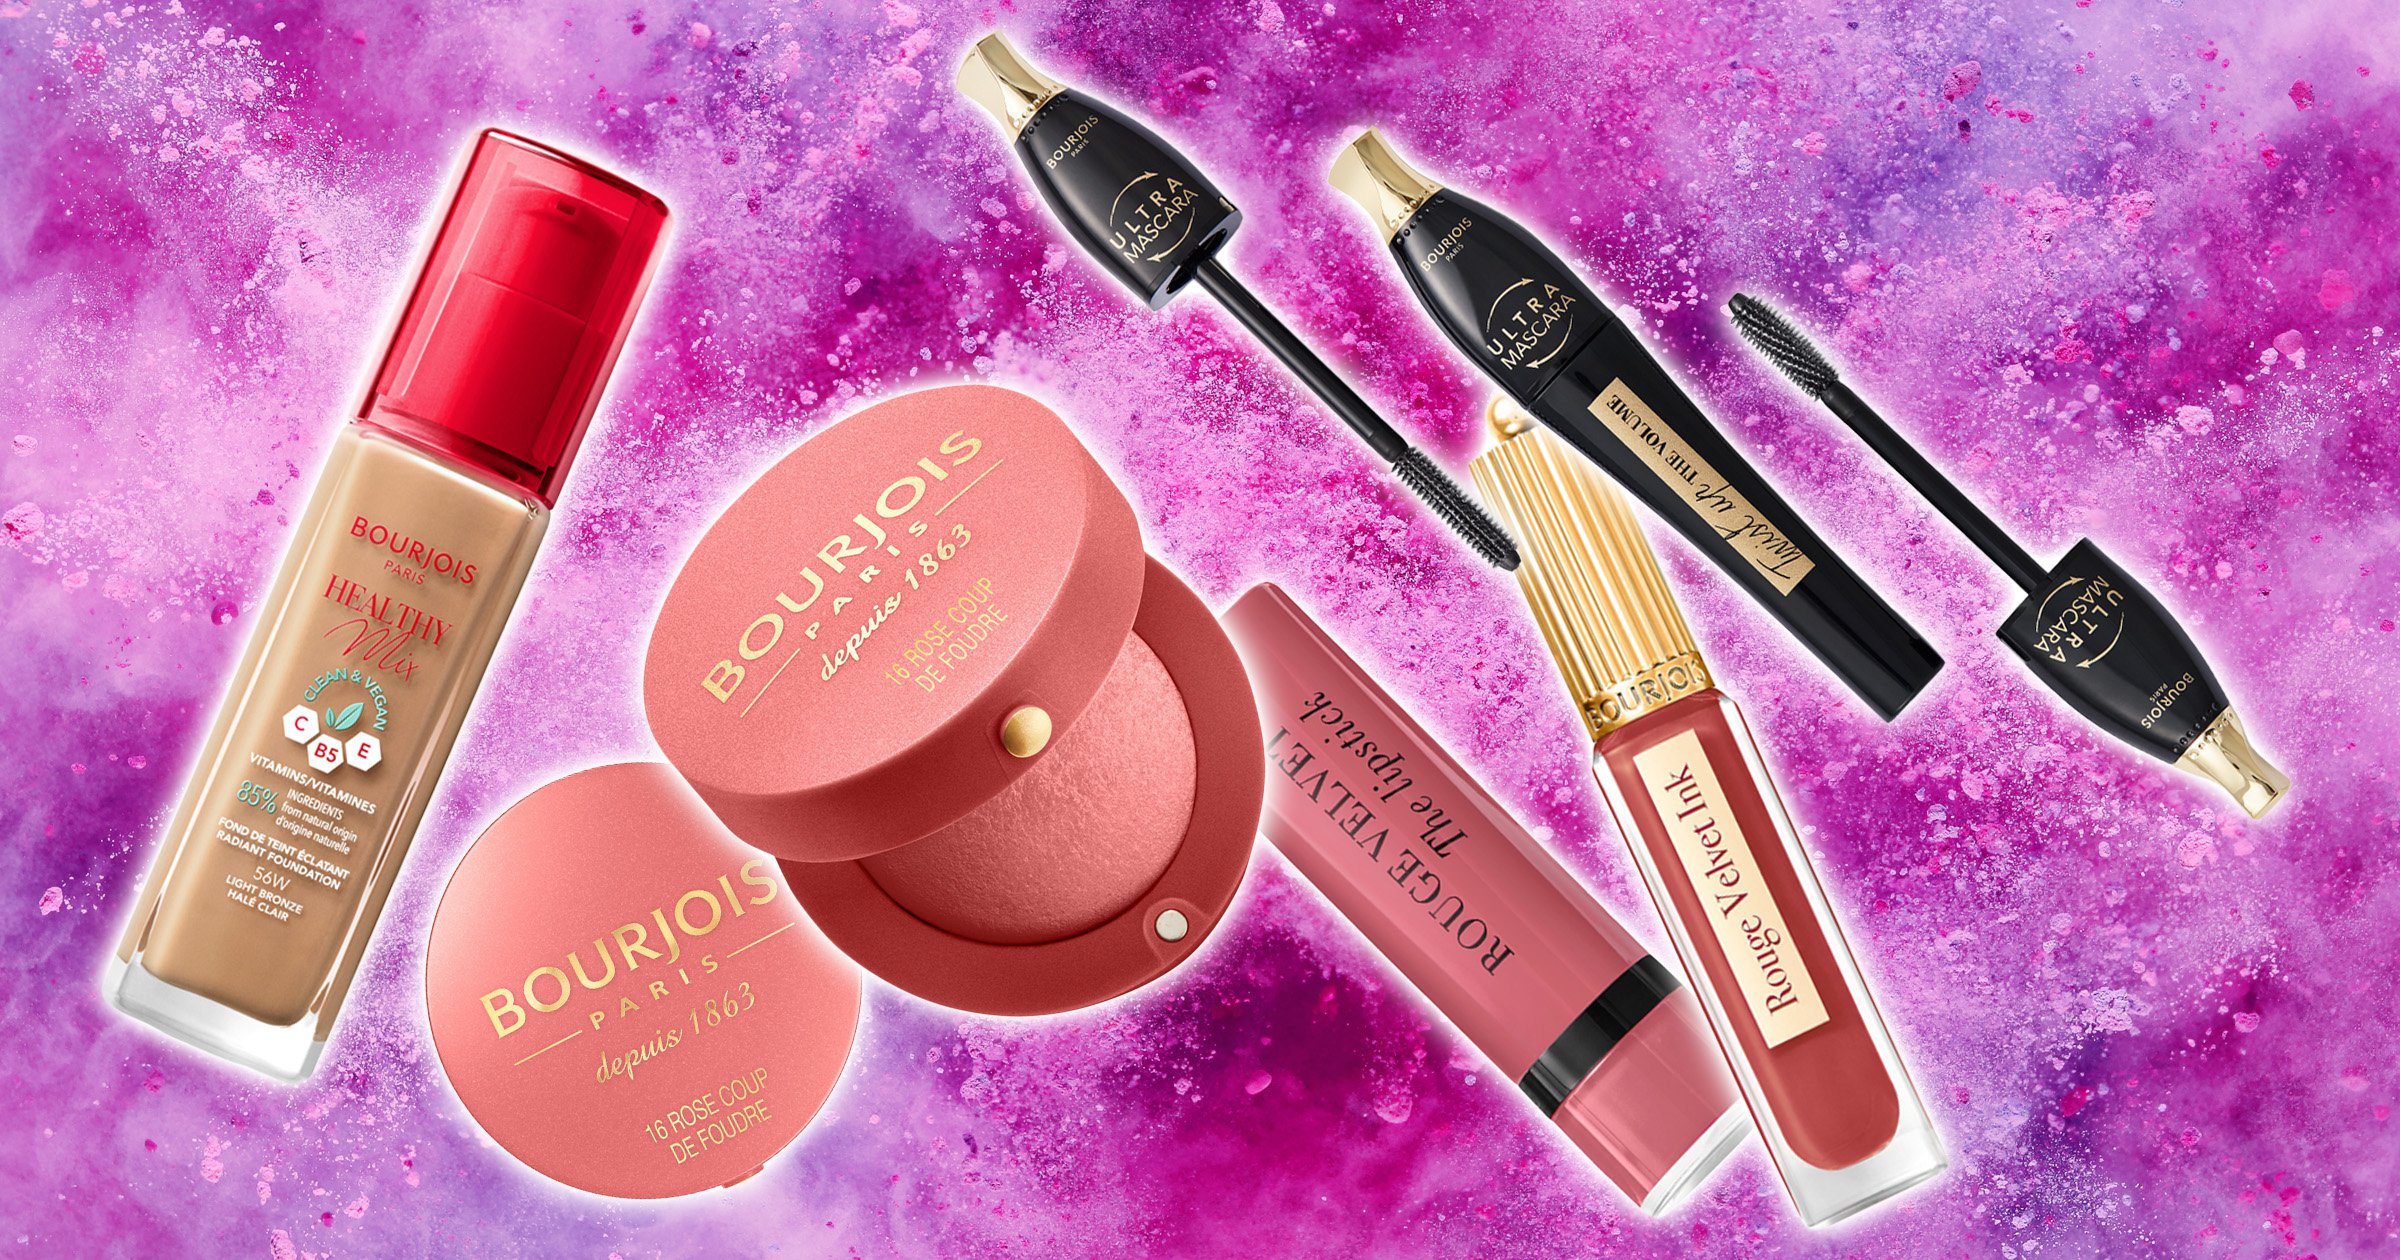 Bourjois is finally back – hero pieces to shop from the resurrected beauty brand